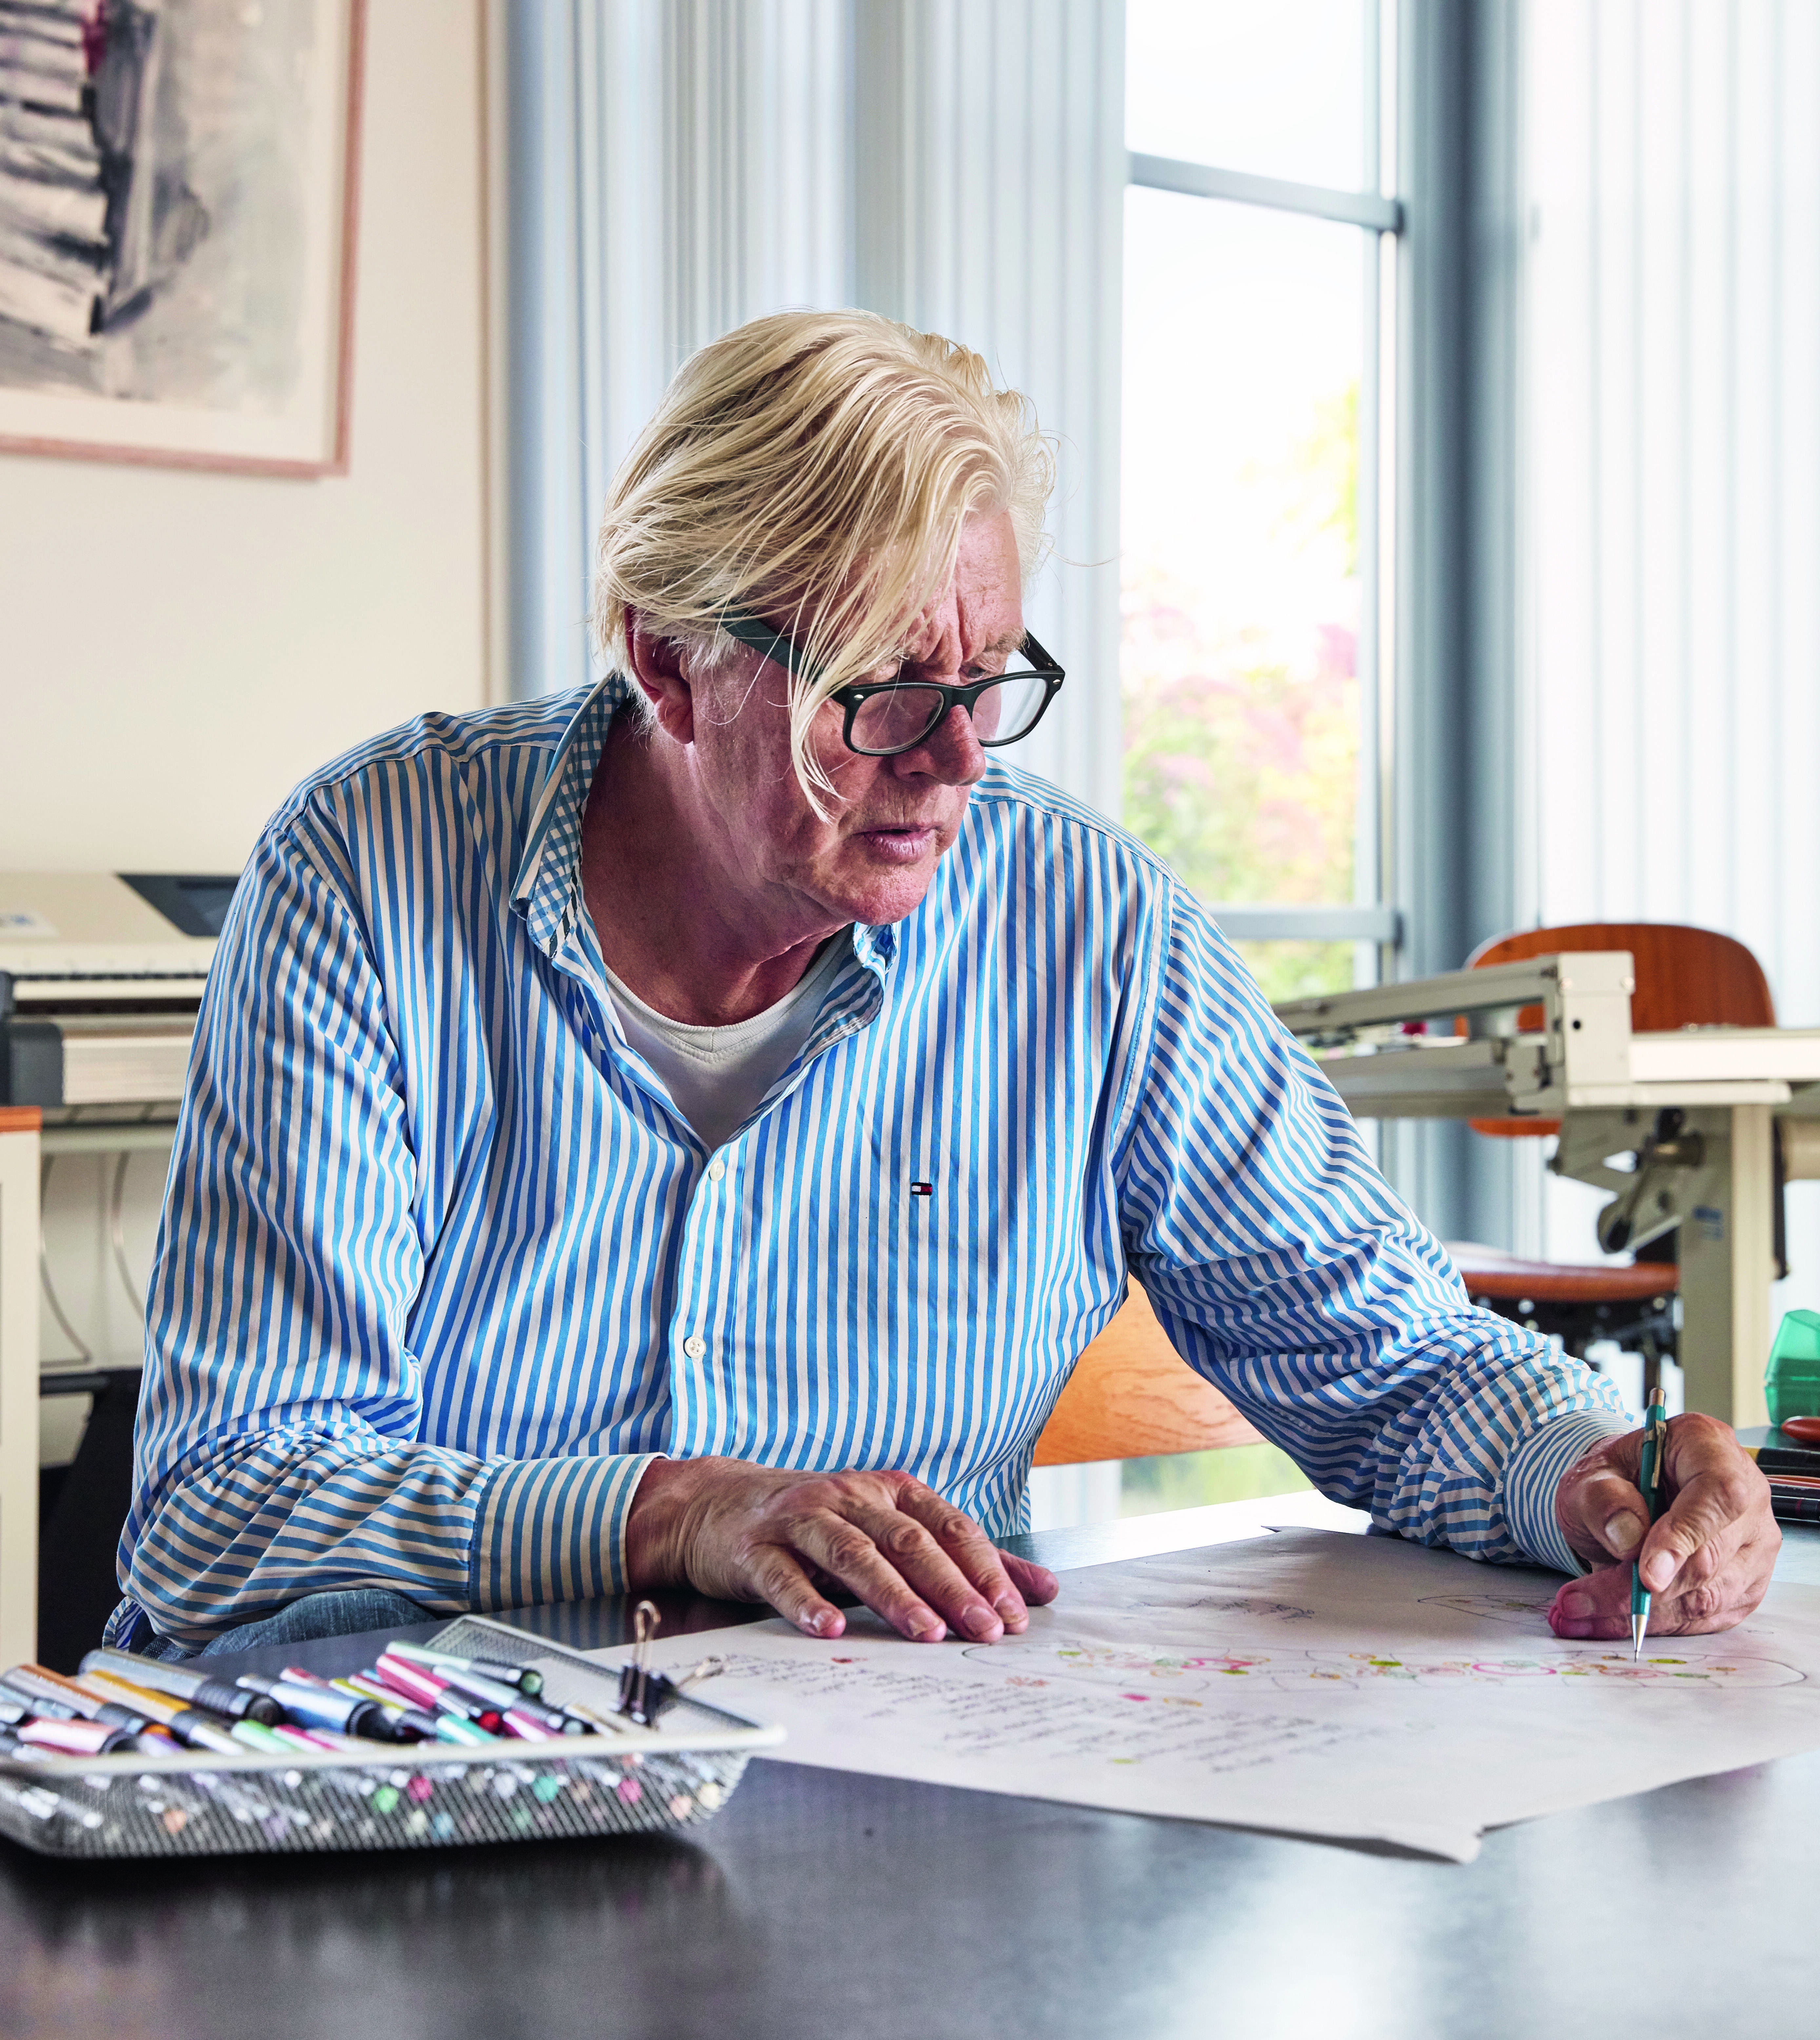 Garden star/ artist Piet Oudolf on climate change, working with starchitects and his increasingly complex planting schemes